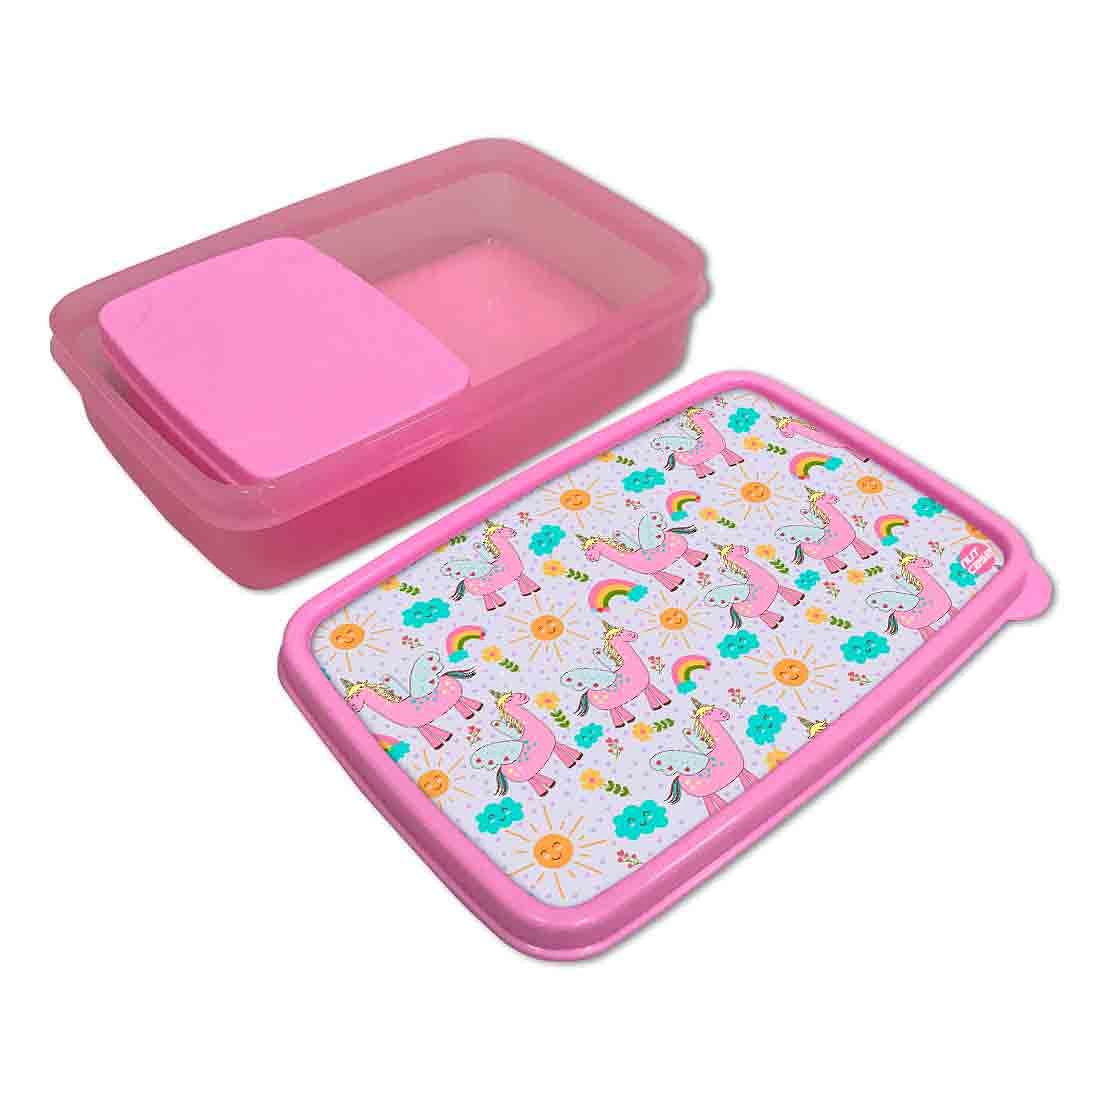 Snacks Serving Box With Small Container for School Kids Girls - Unicorn and Cloud Nutcase